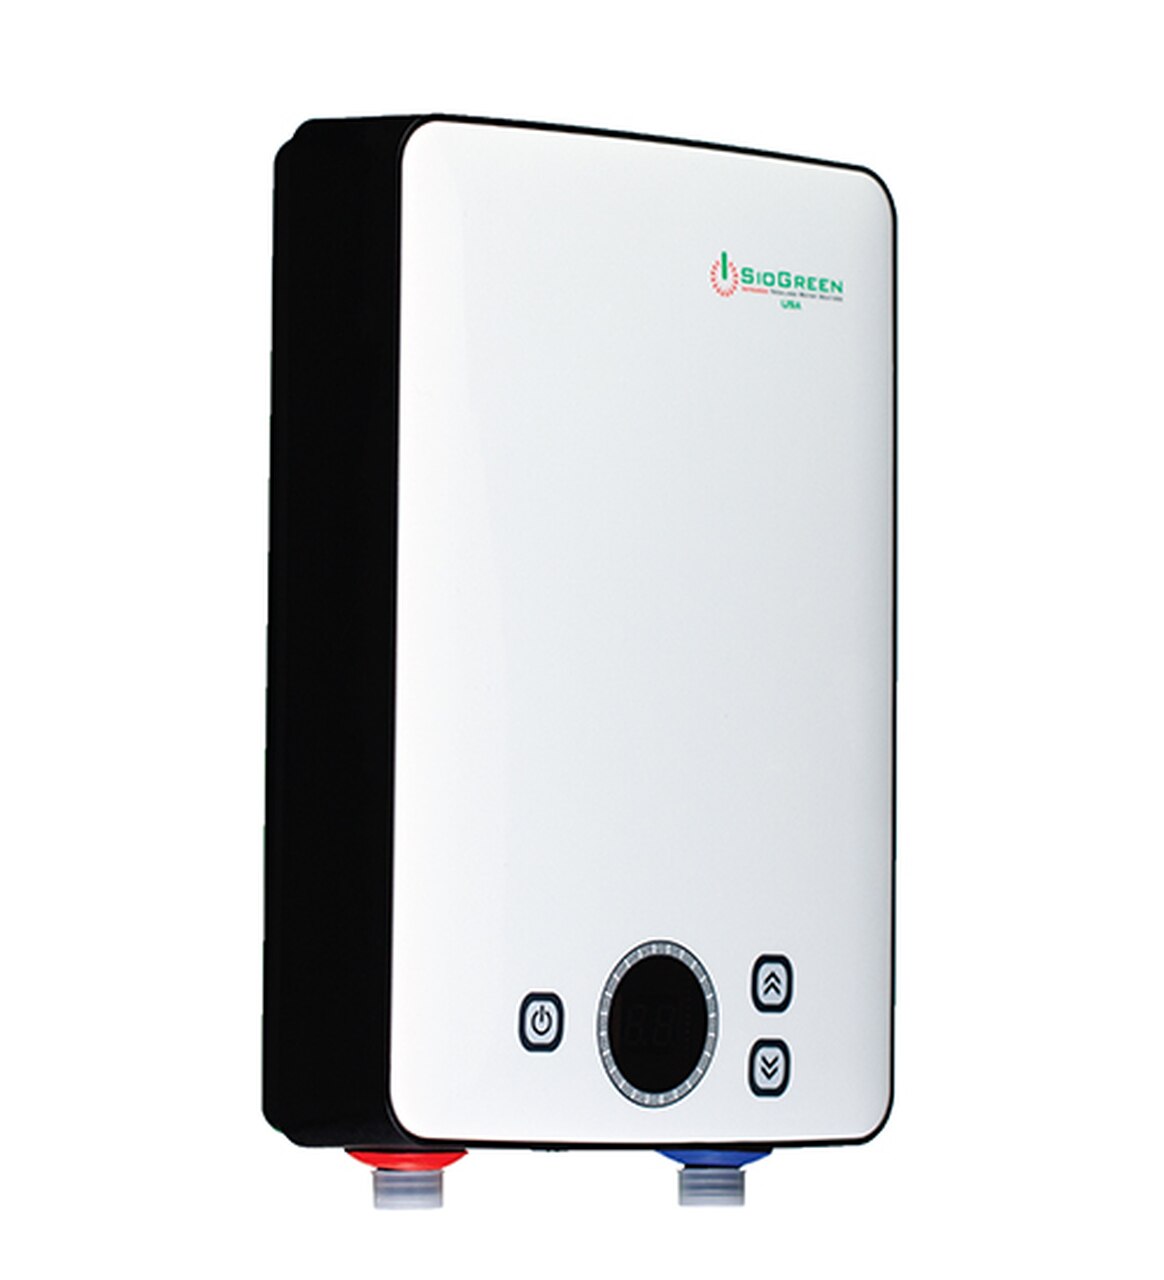 SioGreen IR-30 Infrared 3.4kW 30A 120V 1 GPM Tankless Water Heater New